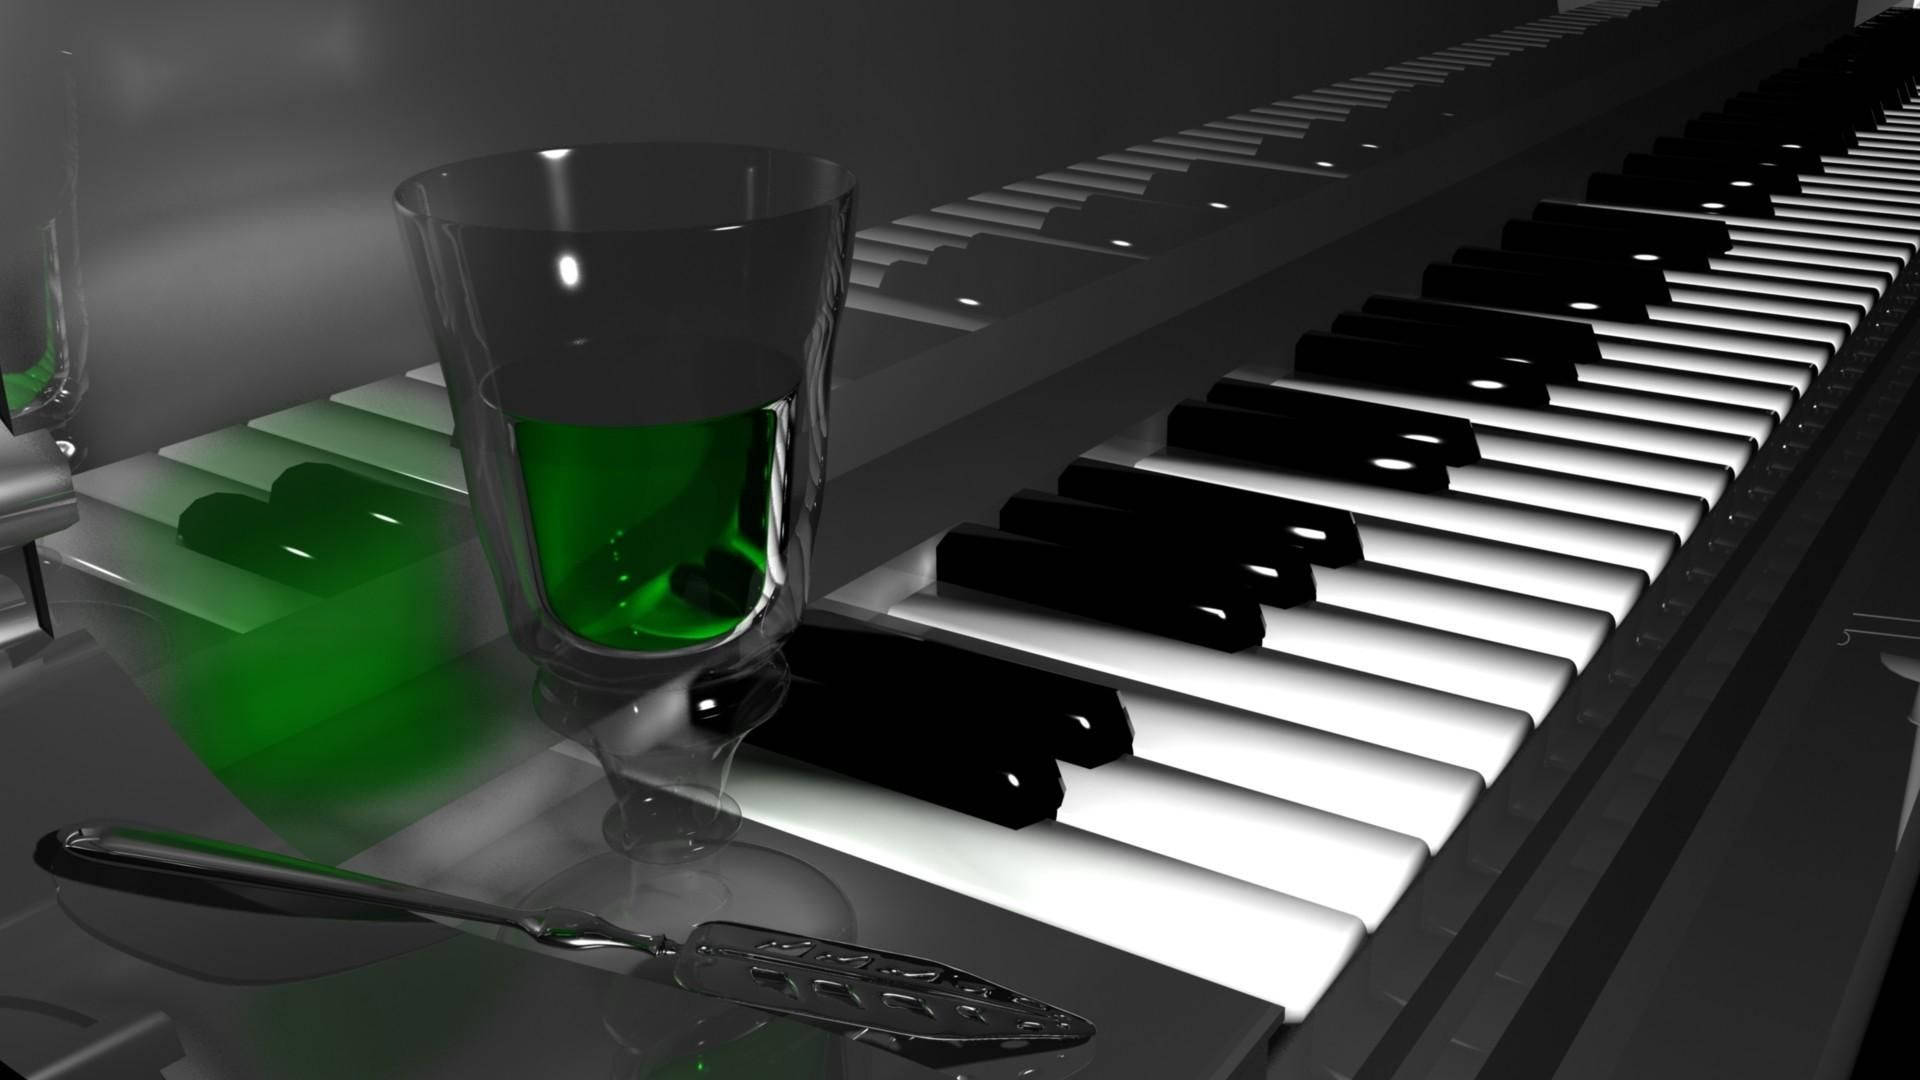 Piano Absinthe Grayscale Art Background